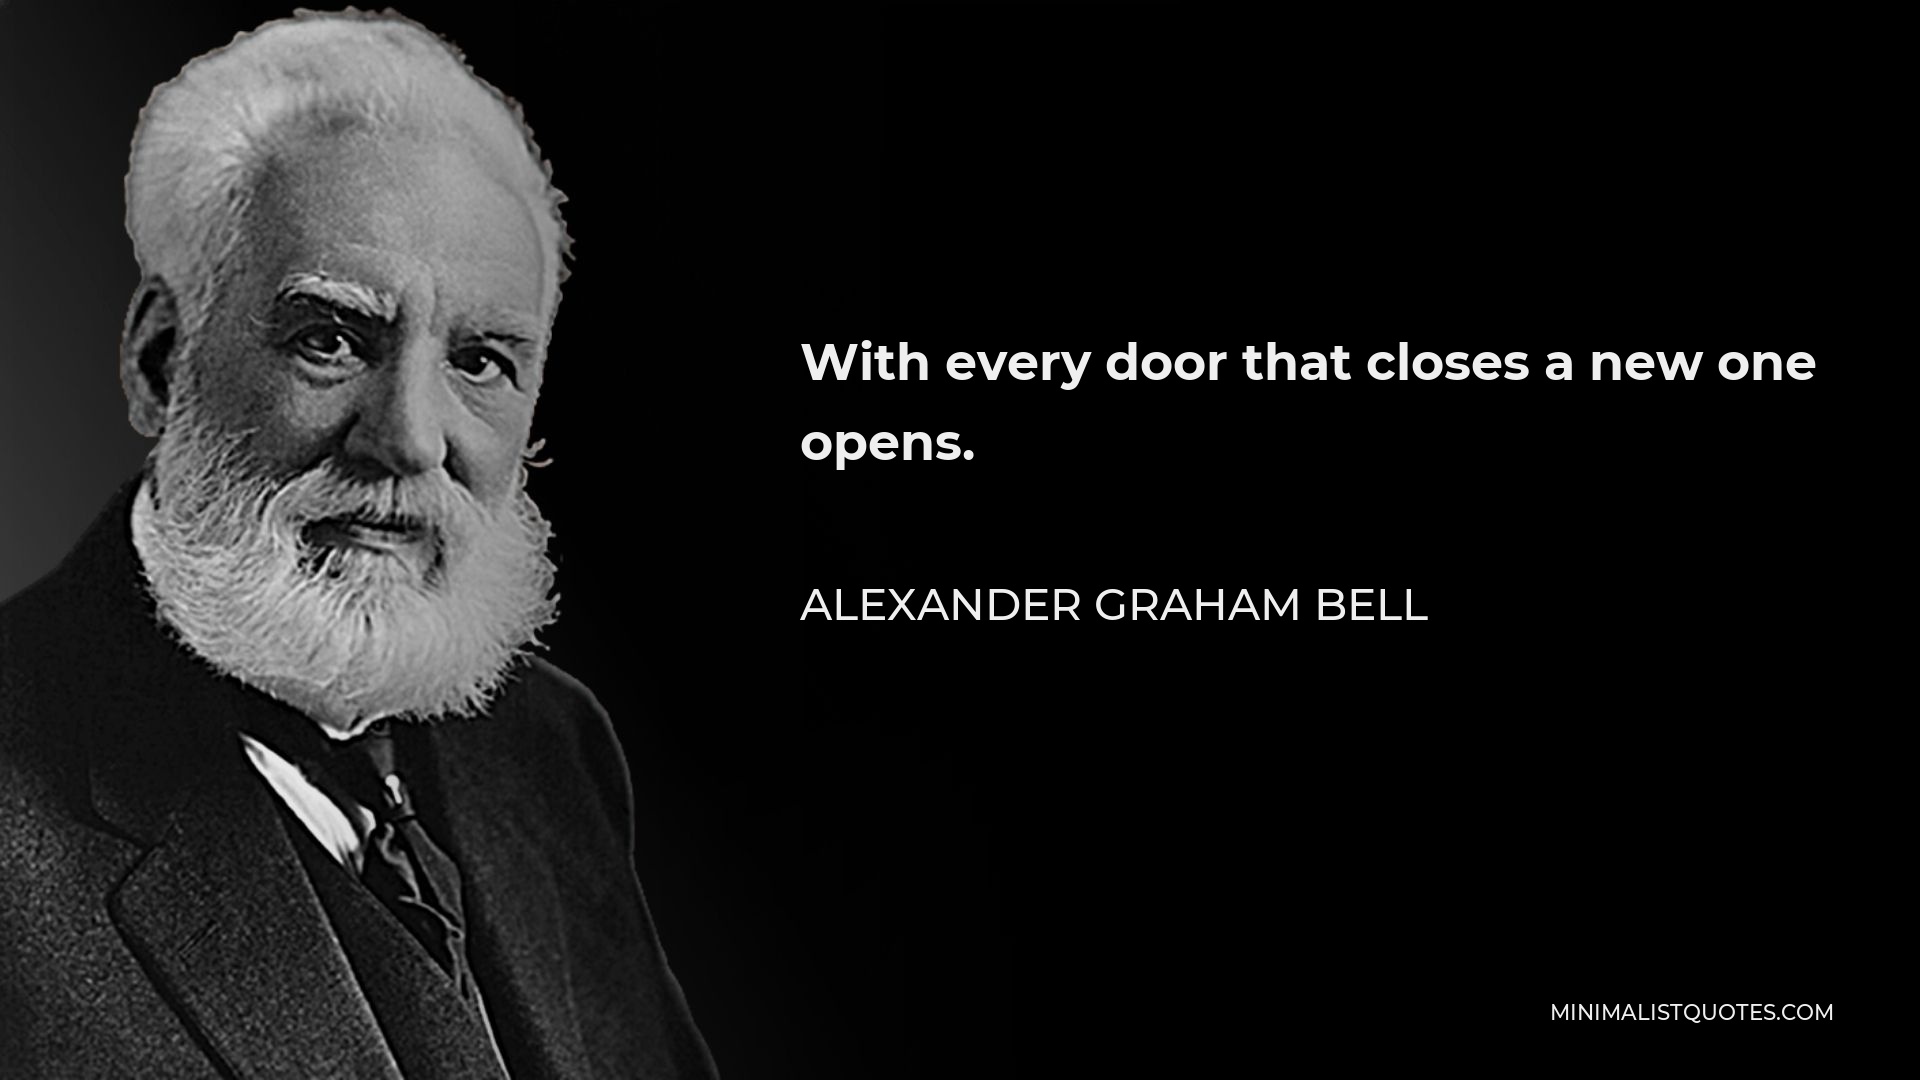 Alexander Graham Bell Quote - With every door that closes a new one opens.